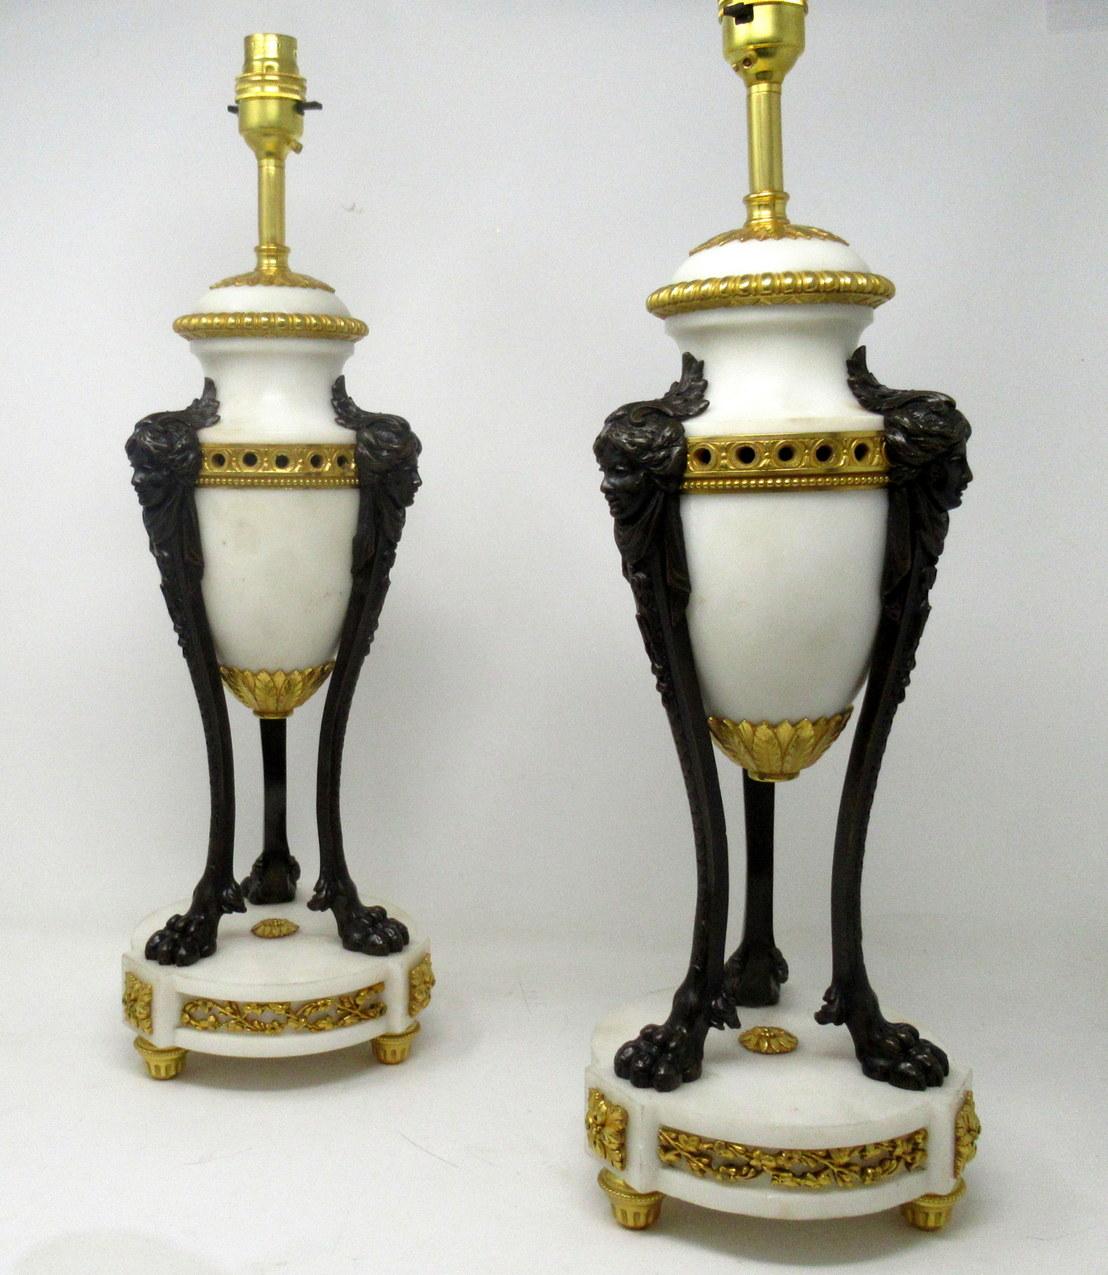 An exceptionally fine quality pair of French heavy gauge ormolu-mounted and bronze patinated statutory marble garniture urns in the Louis XV style, of large proportions, of French origin, now professionally converted to a pair electrical table